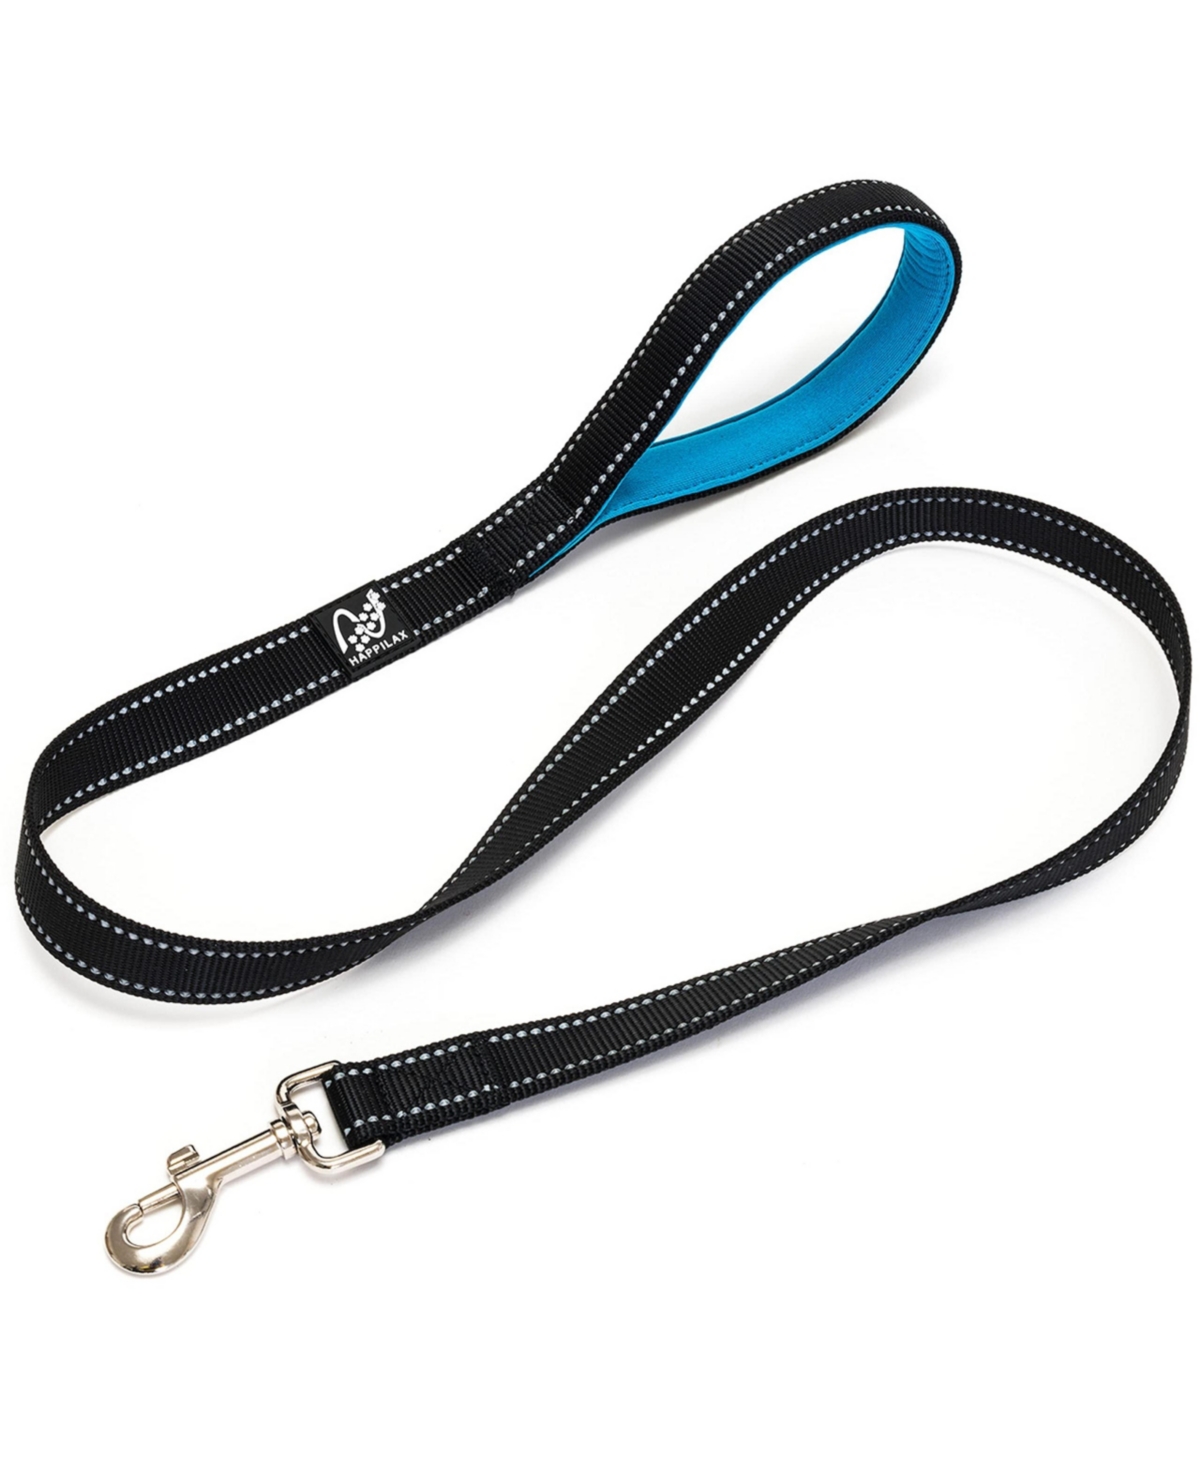 Reflective Dog Leash with Training Control and Cushion Handle - Blue